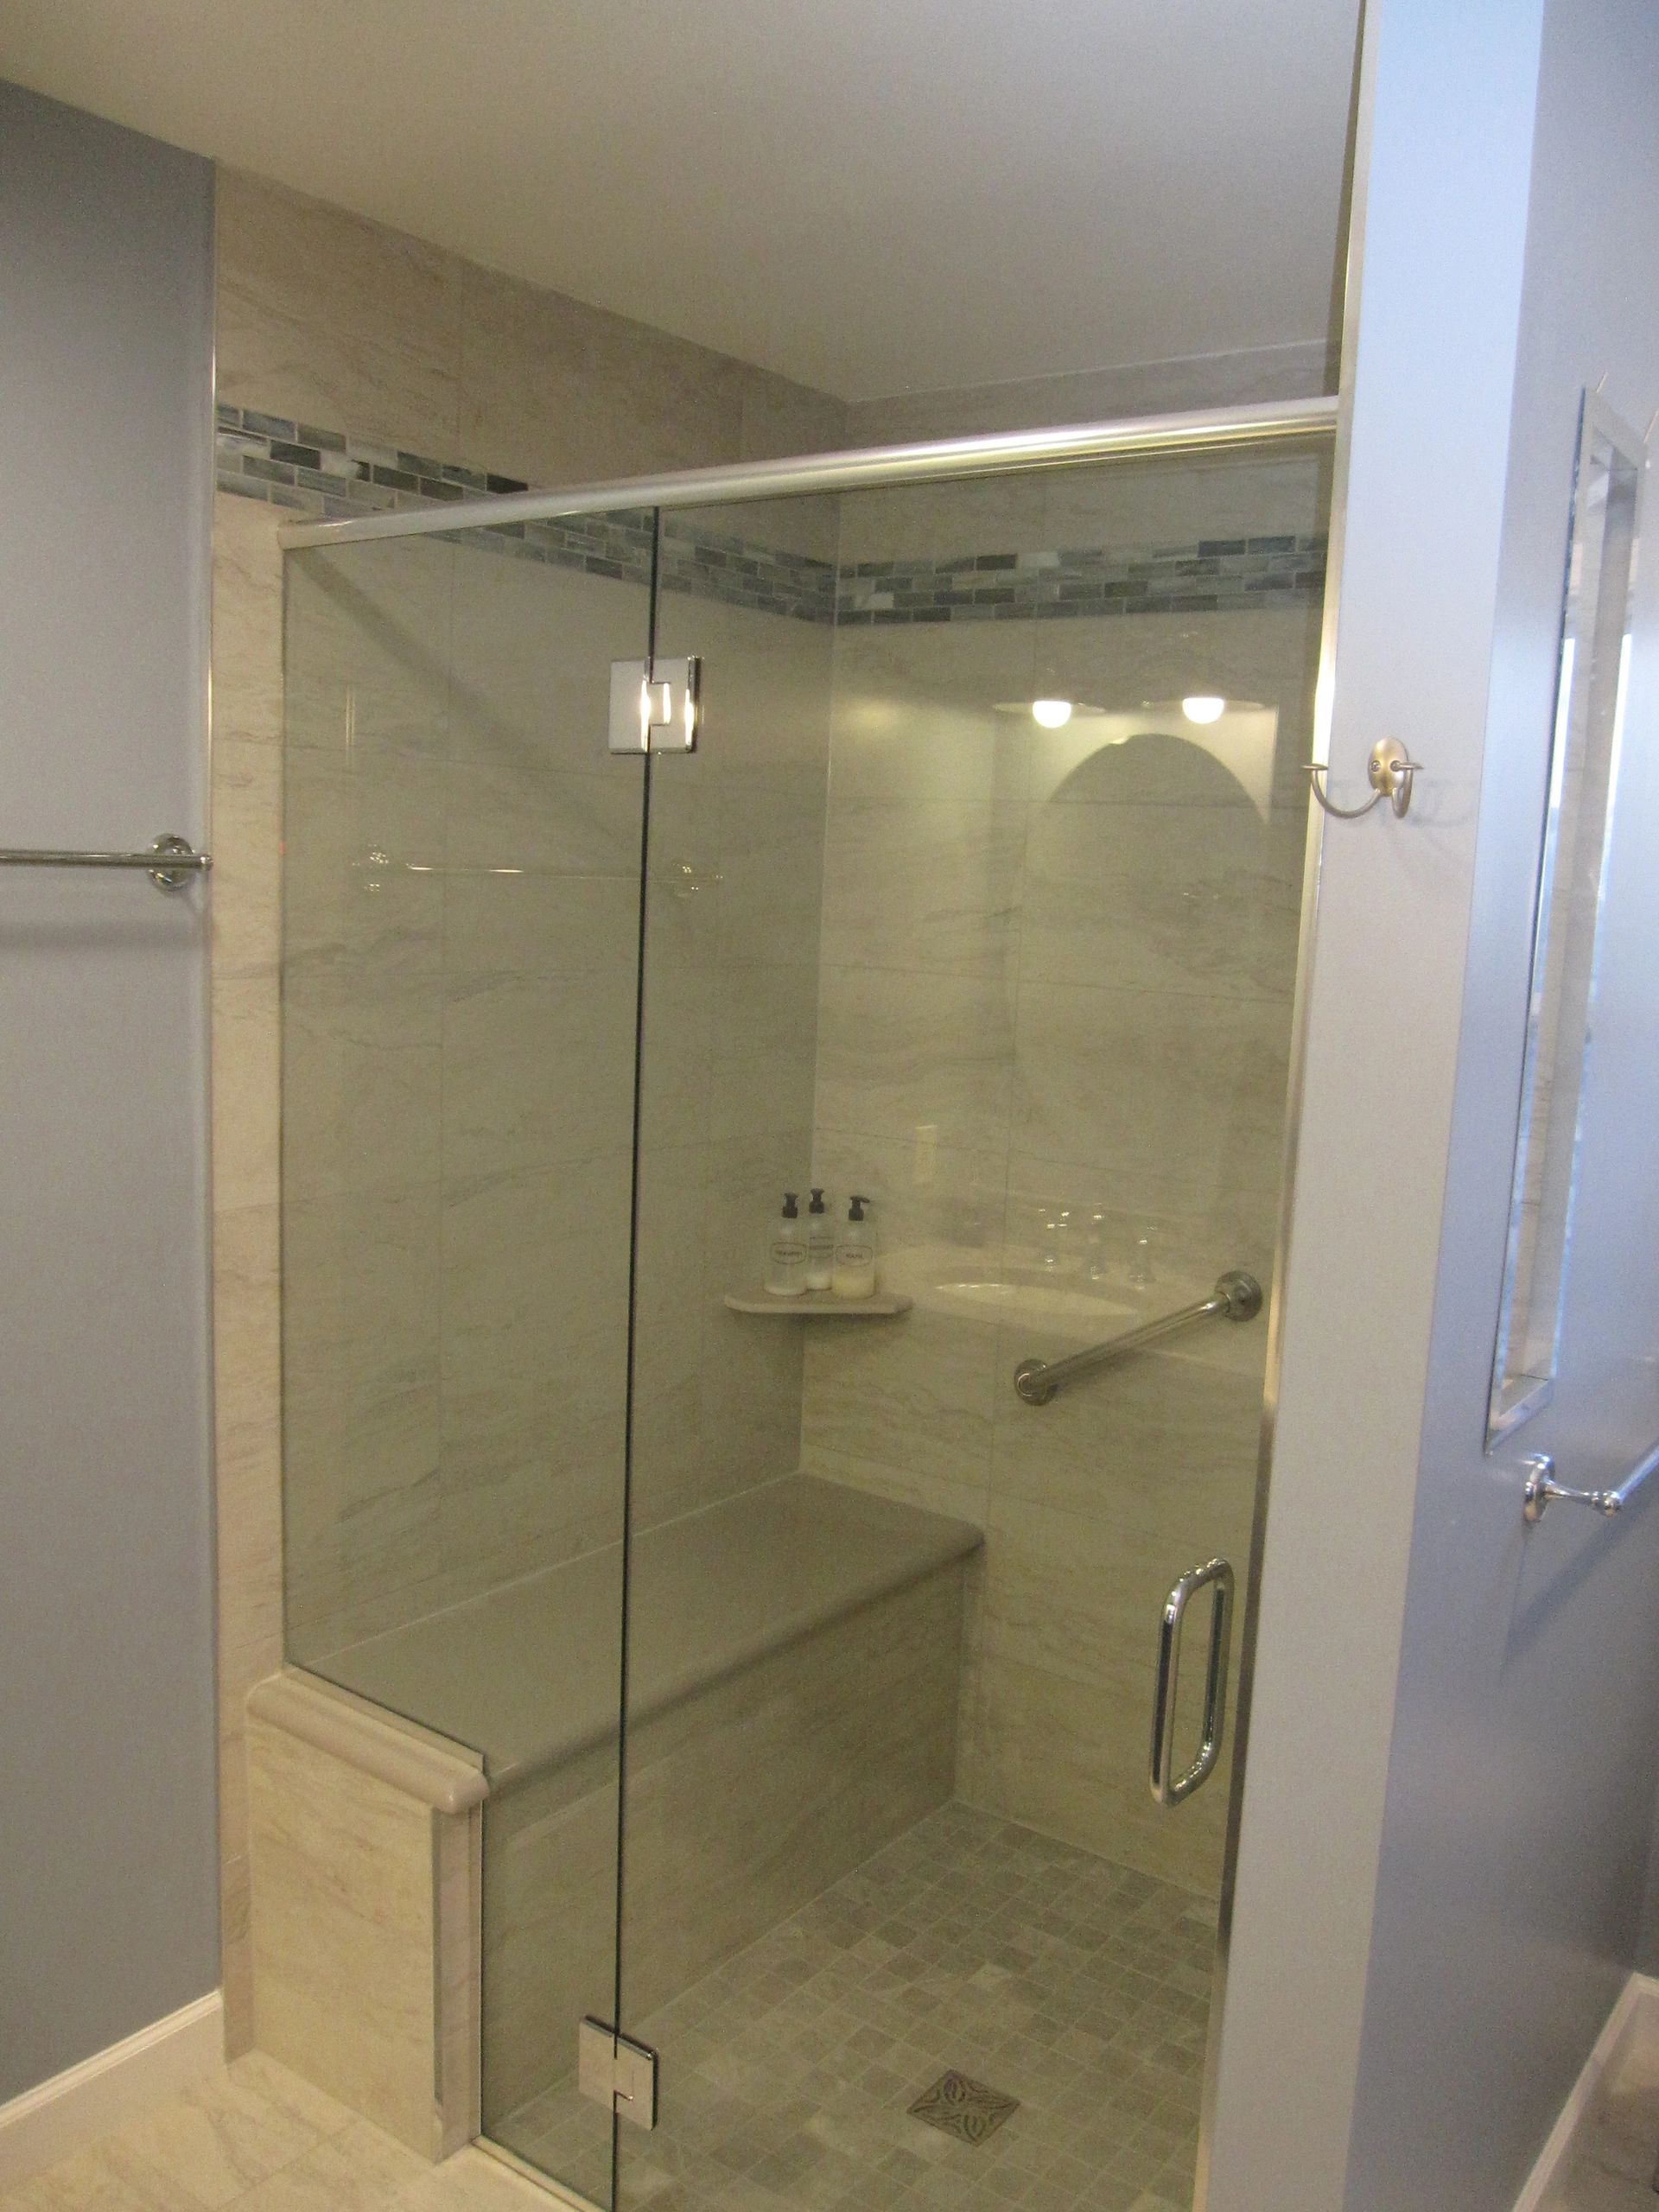 curb less shower, shower bench, laticrete spectra lock grout, glass feature strip, heated floor 